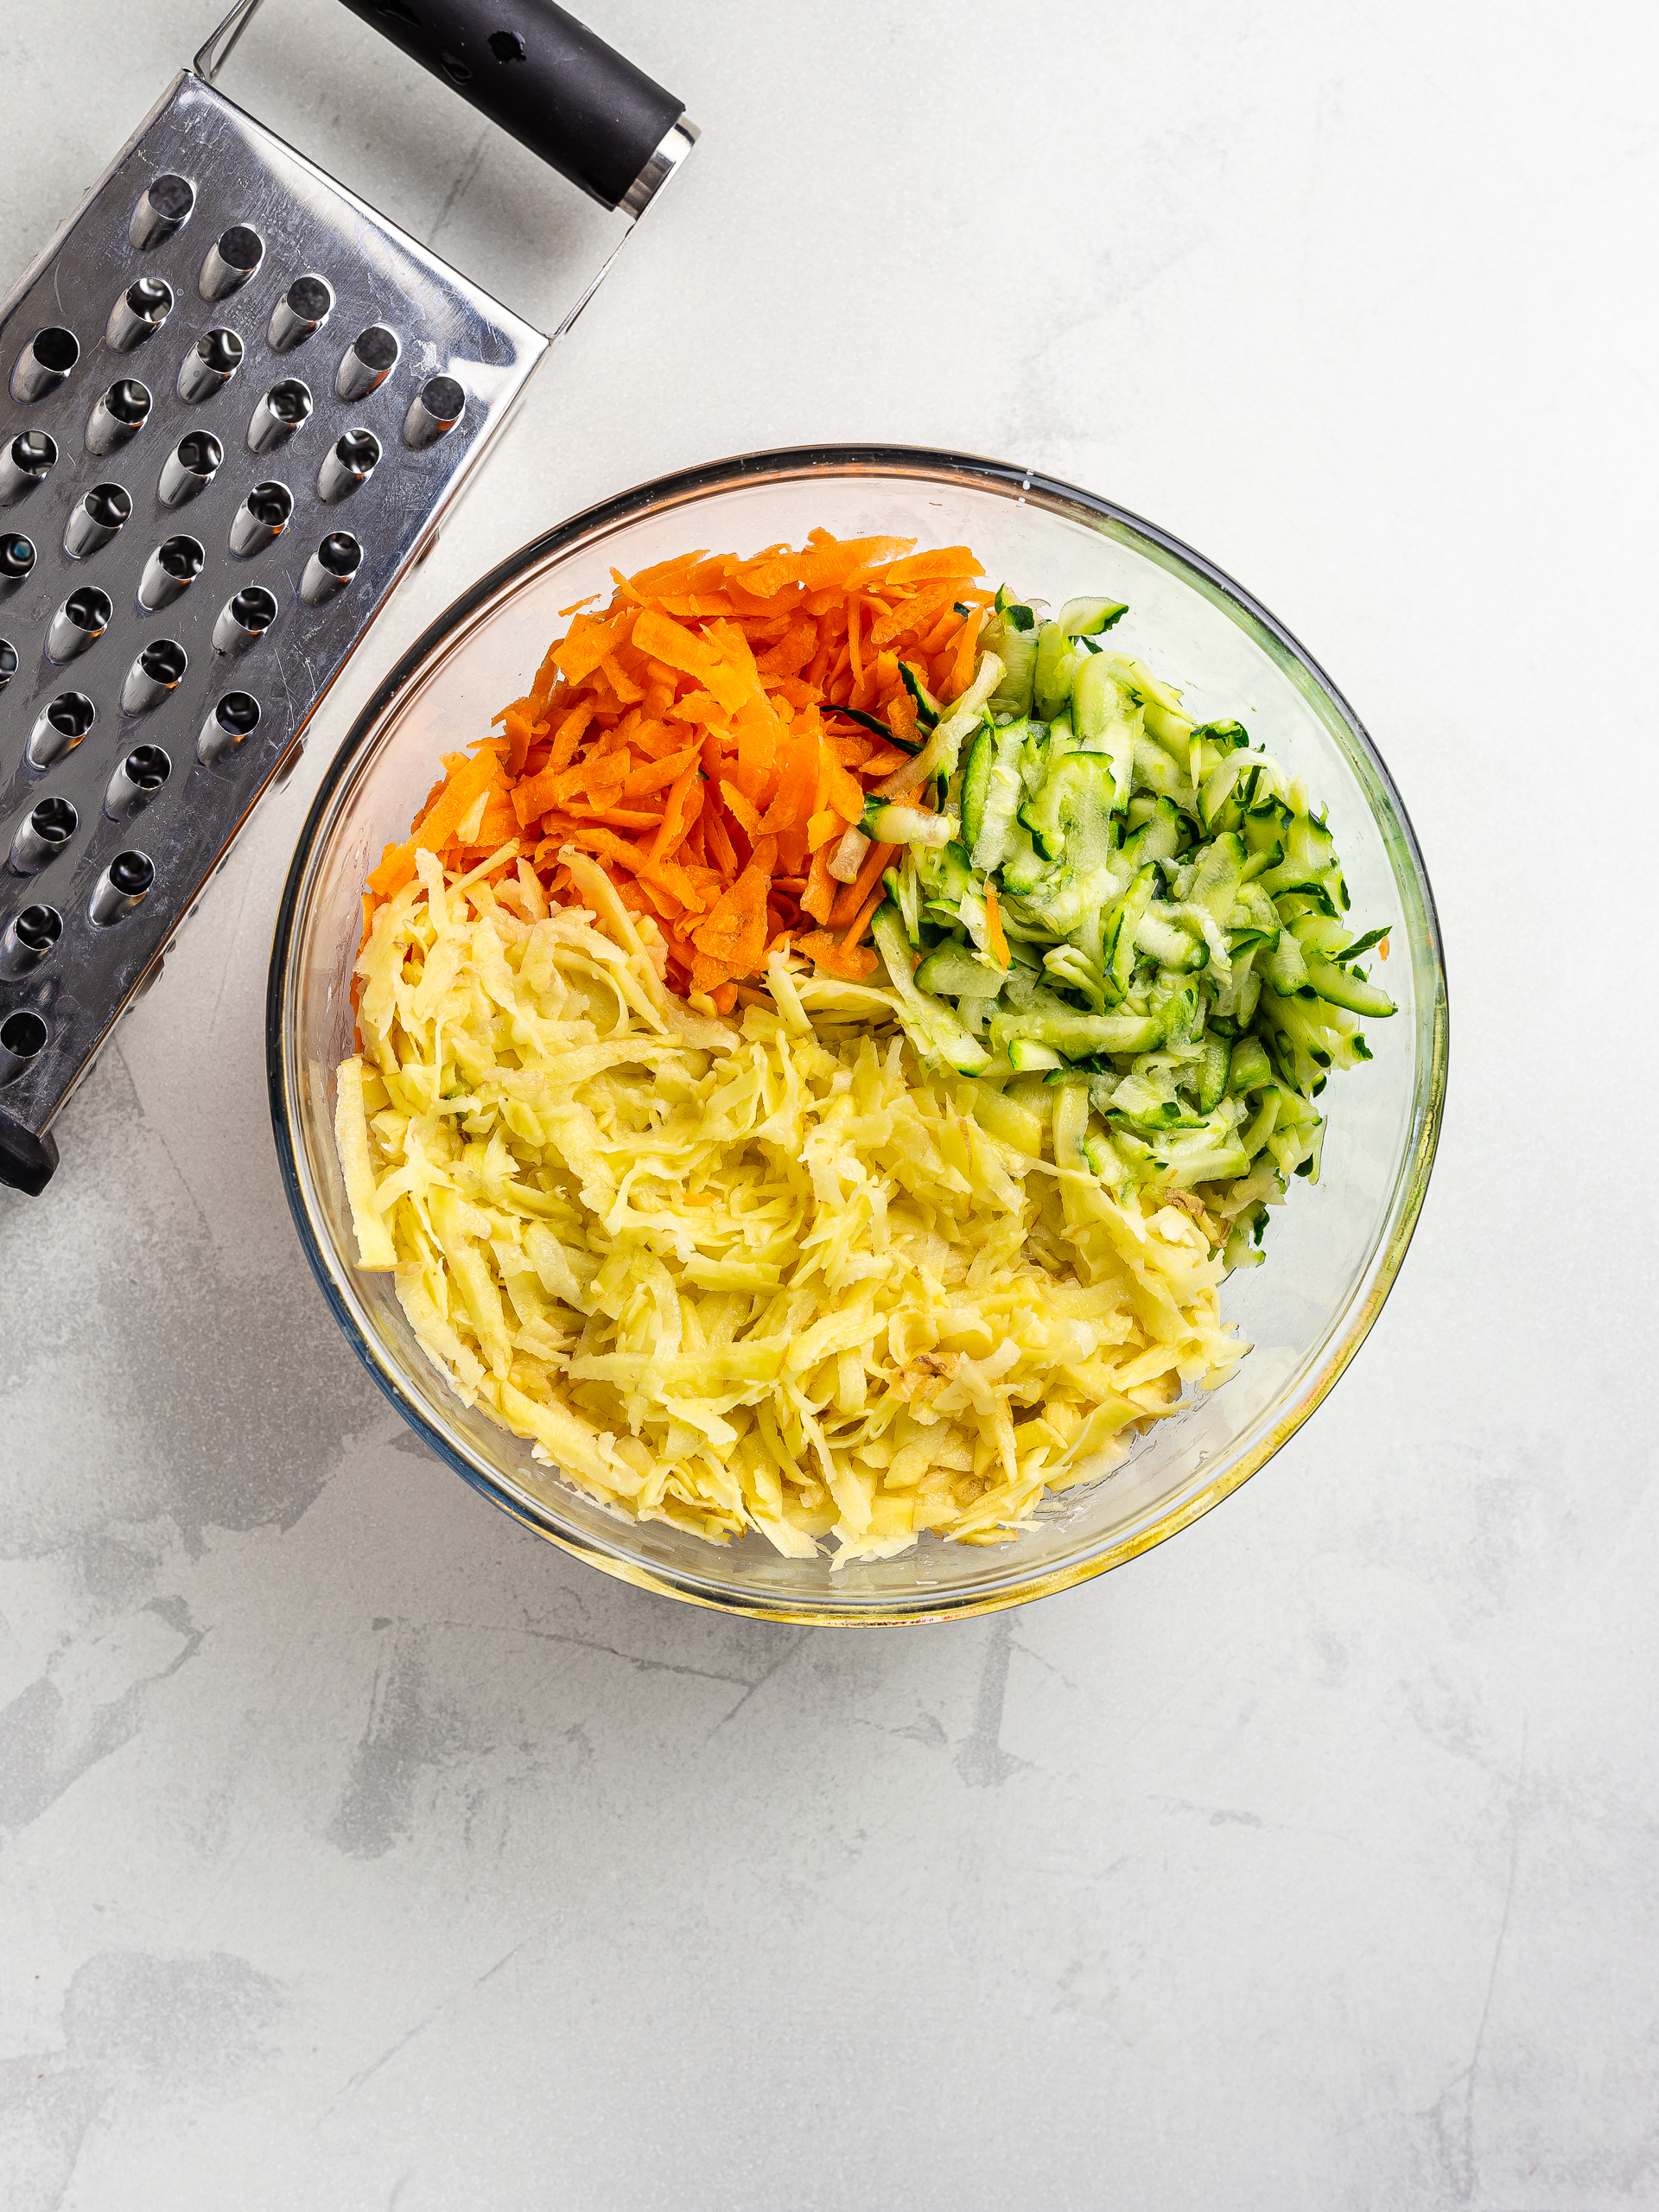 grated carrots potatoes and zucchini